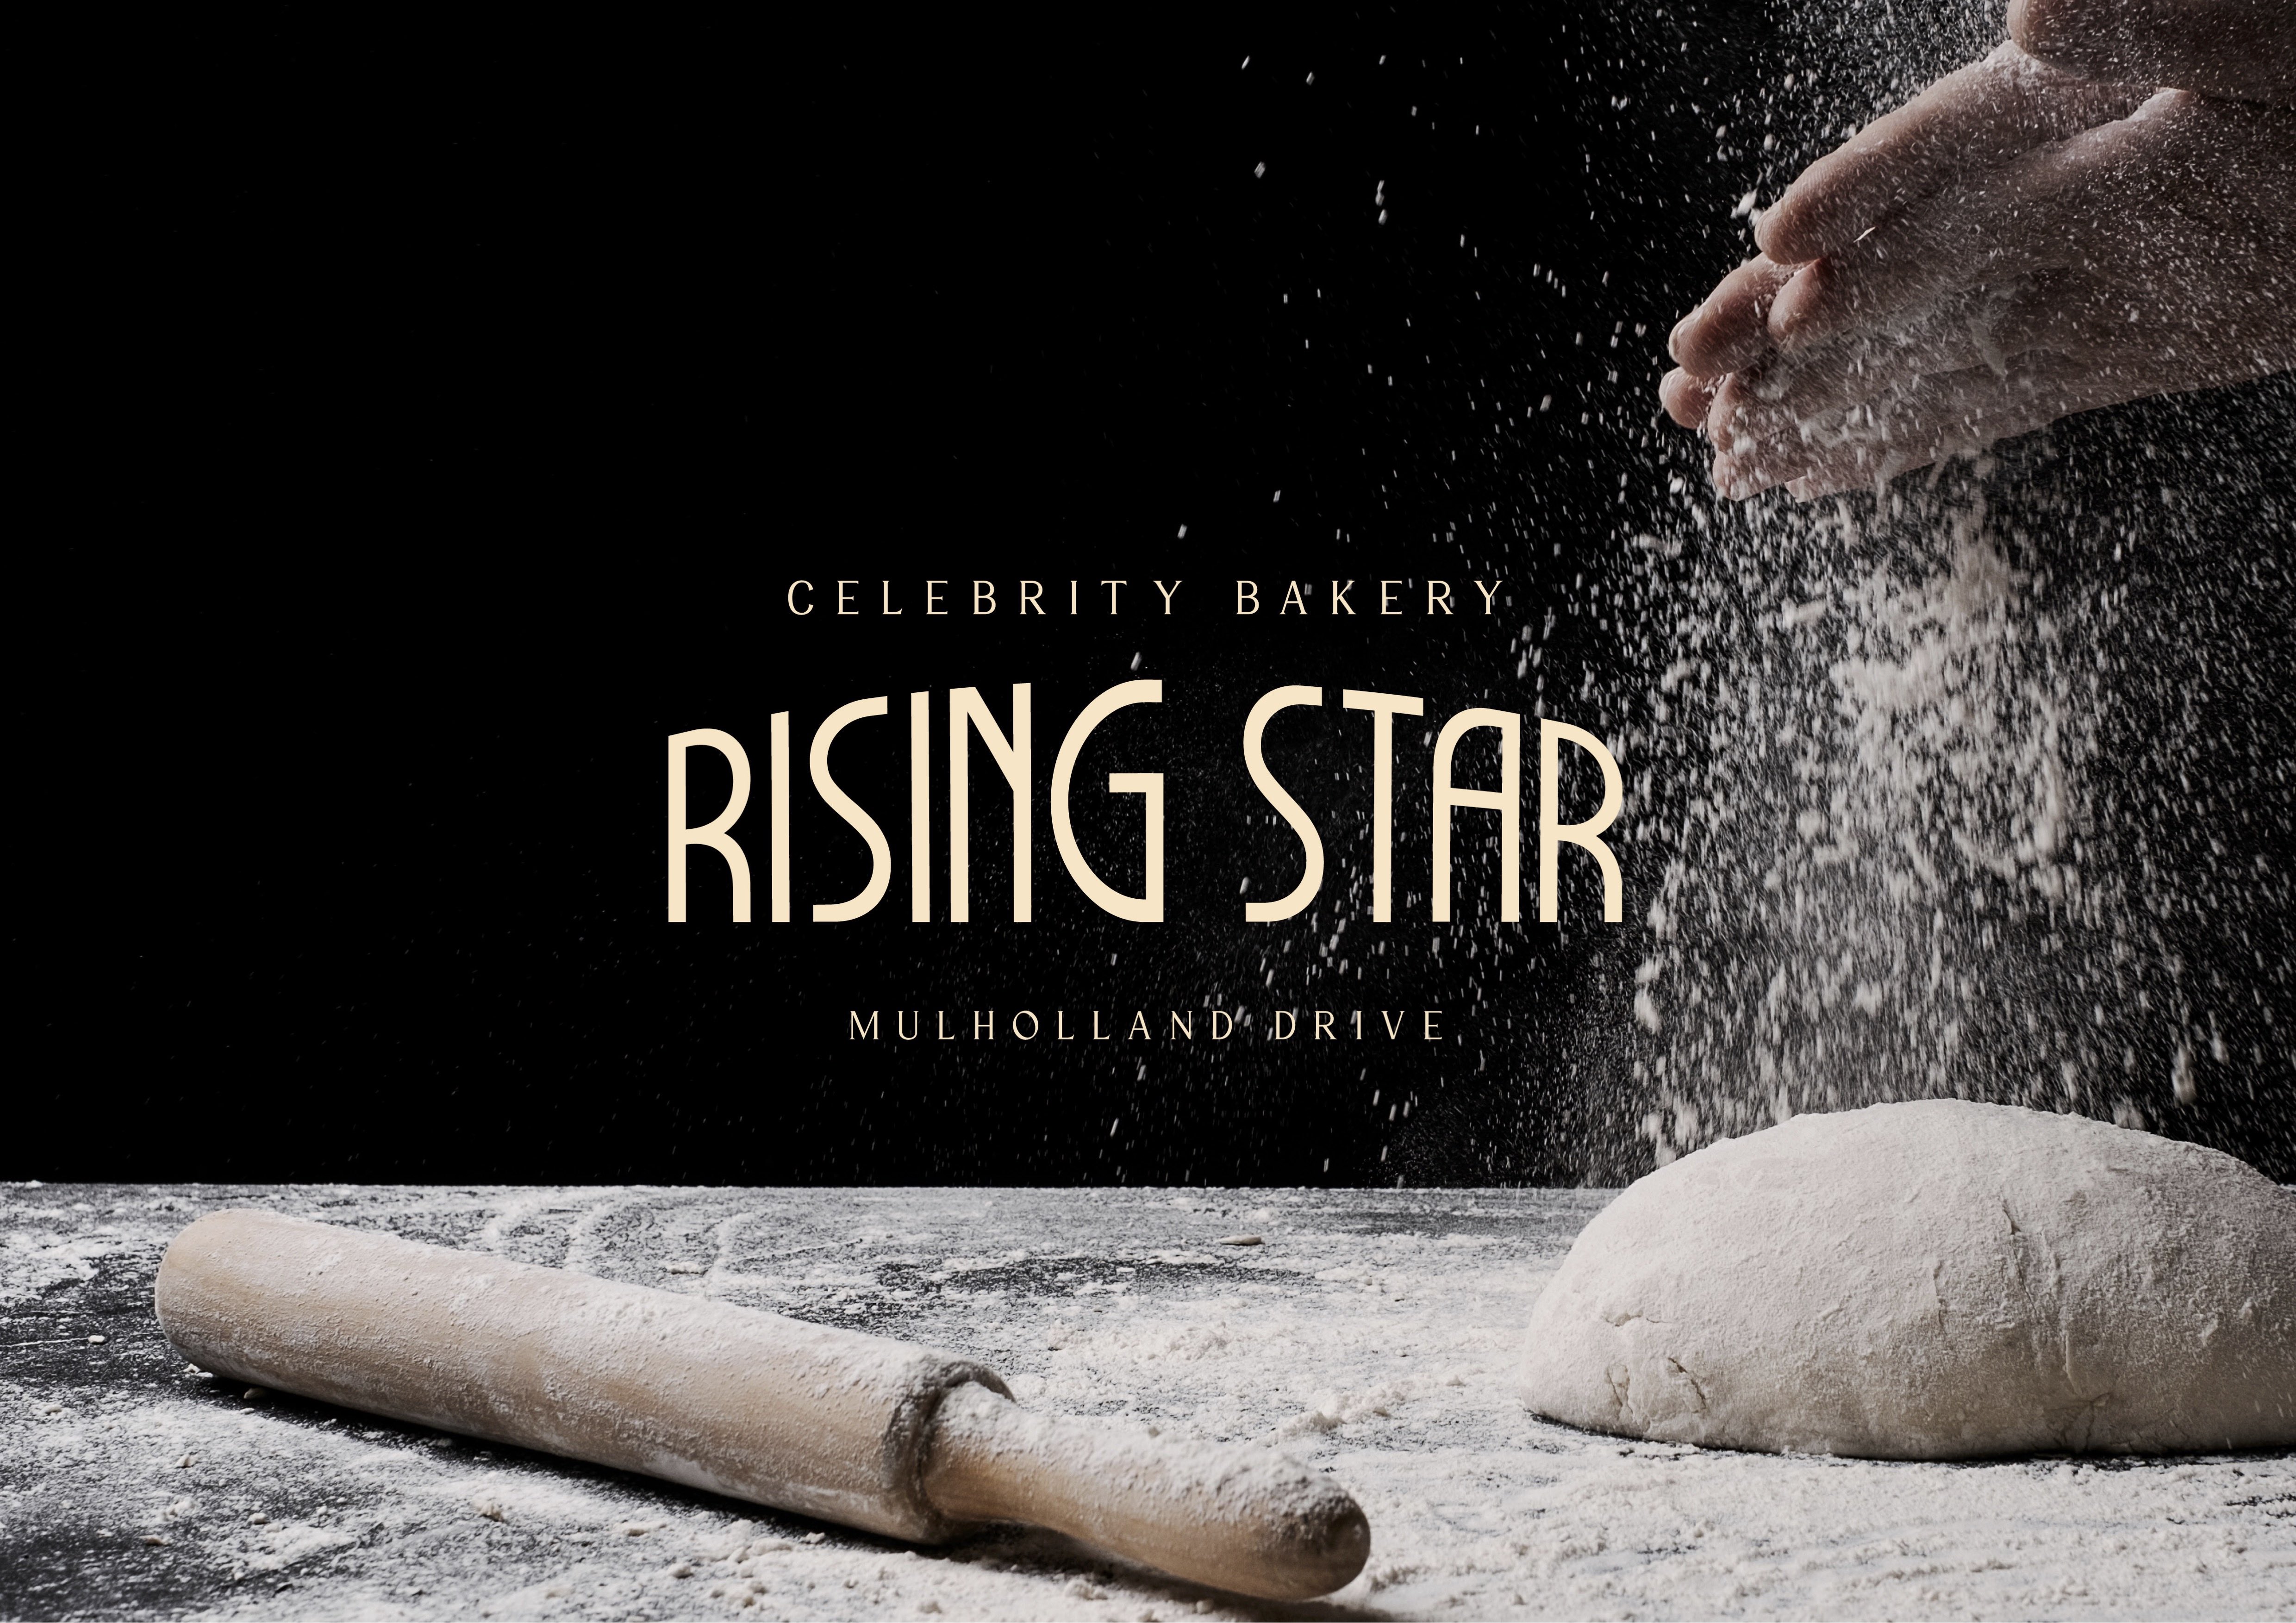 Rising Star bakery logo by Thea Reeder. An art deco style typeface reads Rising Star, with a secondary typeface reading "celebrity bakery" and "Mulholland Drive".